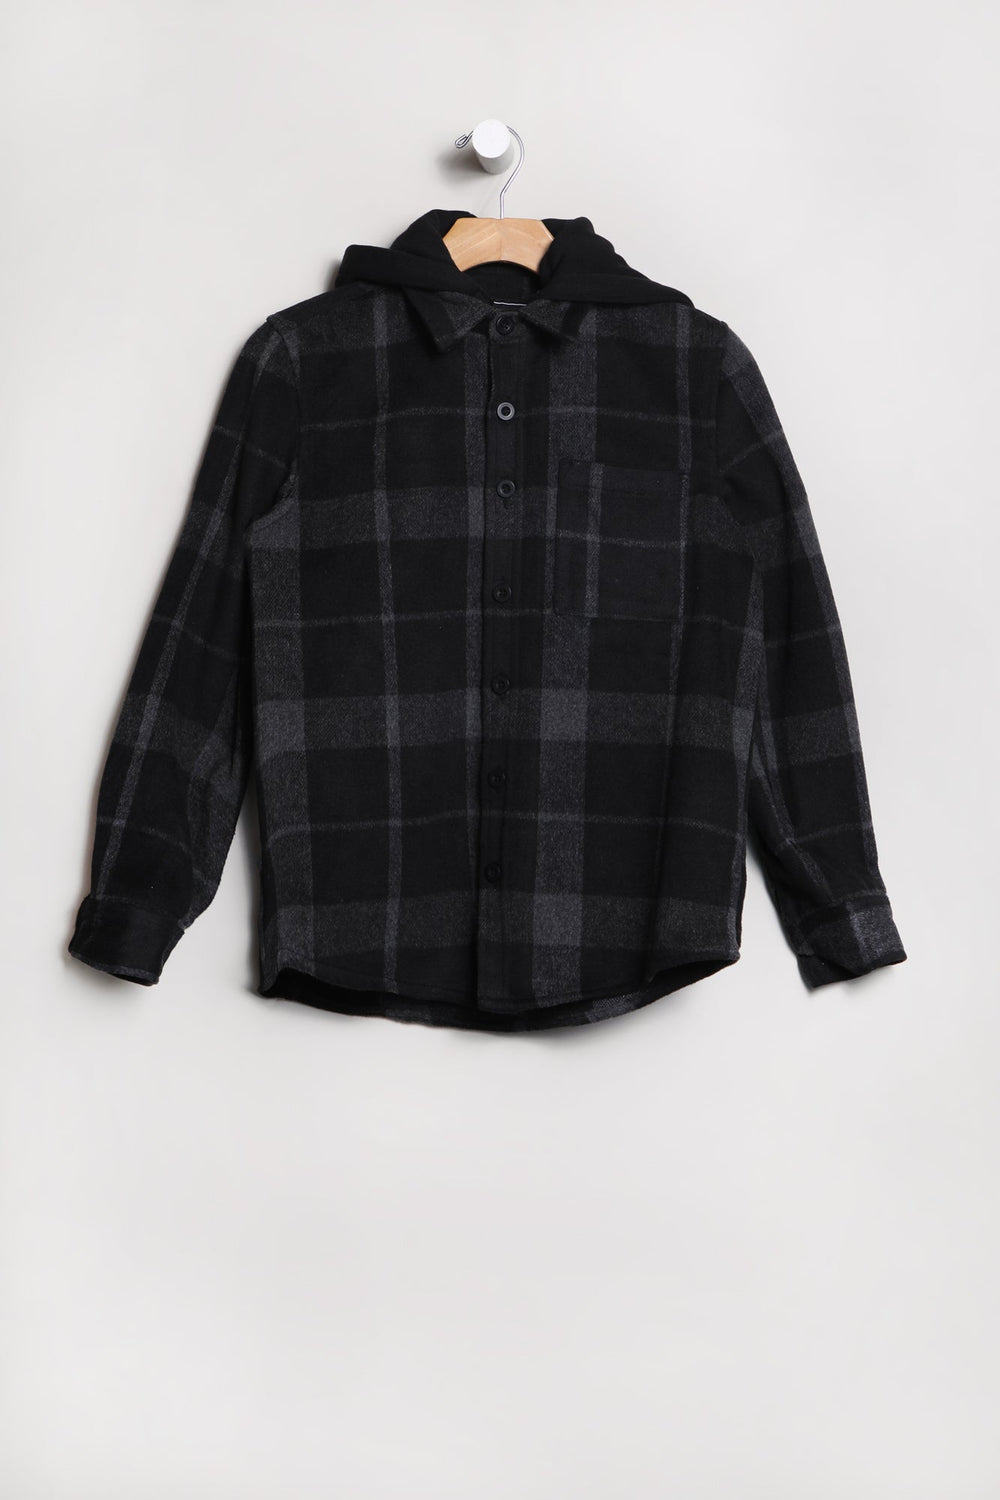 West49 Youth Hooded Plaid Shacket Charcoal